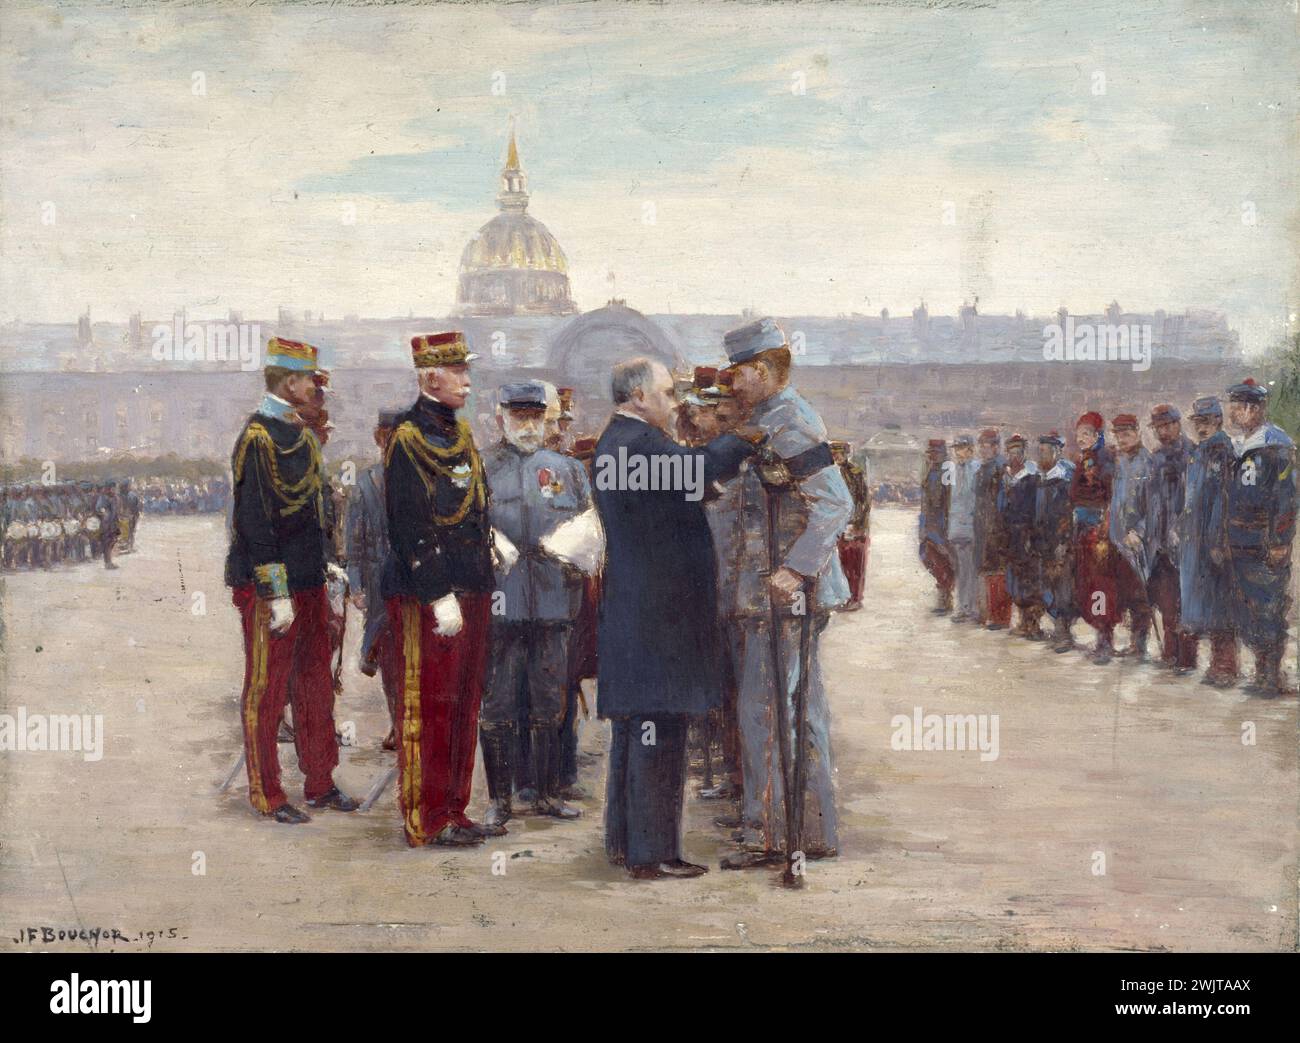 Joseph-Félix Bouchor (1853-1937). 'Presentation of the decorations on the Esplanade des Invalides by President Poincaré, September 17, 1915'. Oil on wood. Paris, Carnavalet museum. 32938-17 VIIEME VII 7th 7th district, BEQUILLE, WORK, Official Ceremony, Decoration, Decorate, French State, Hotel des Invalides, Oil on Wood, Officer, First World War, President French Republic, Discount, Soldier, Esplanade Stock Photo